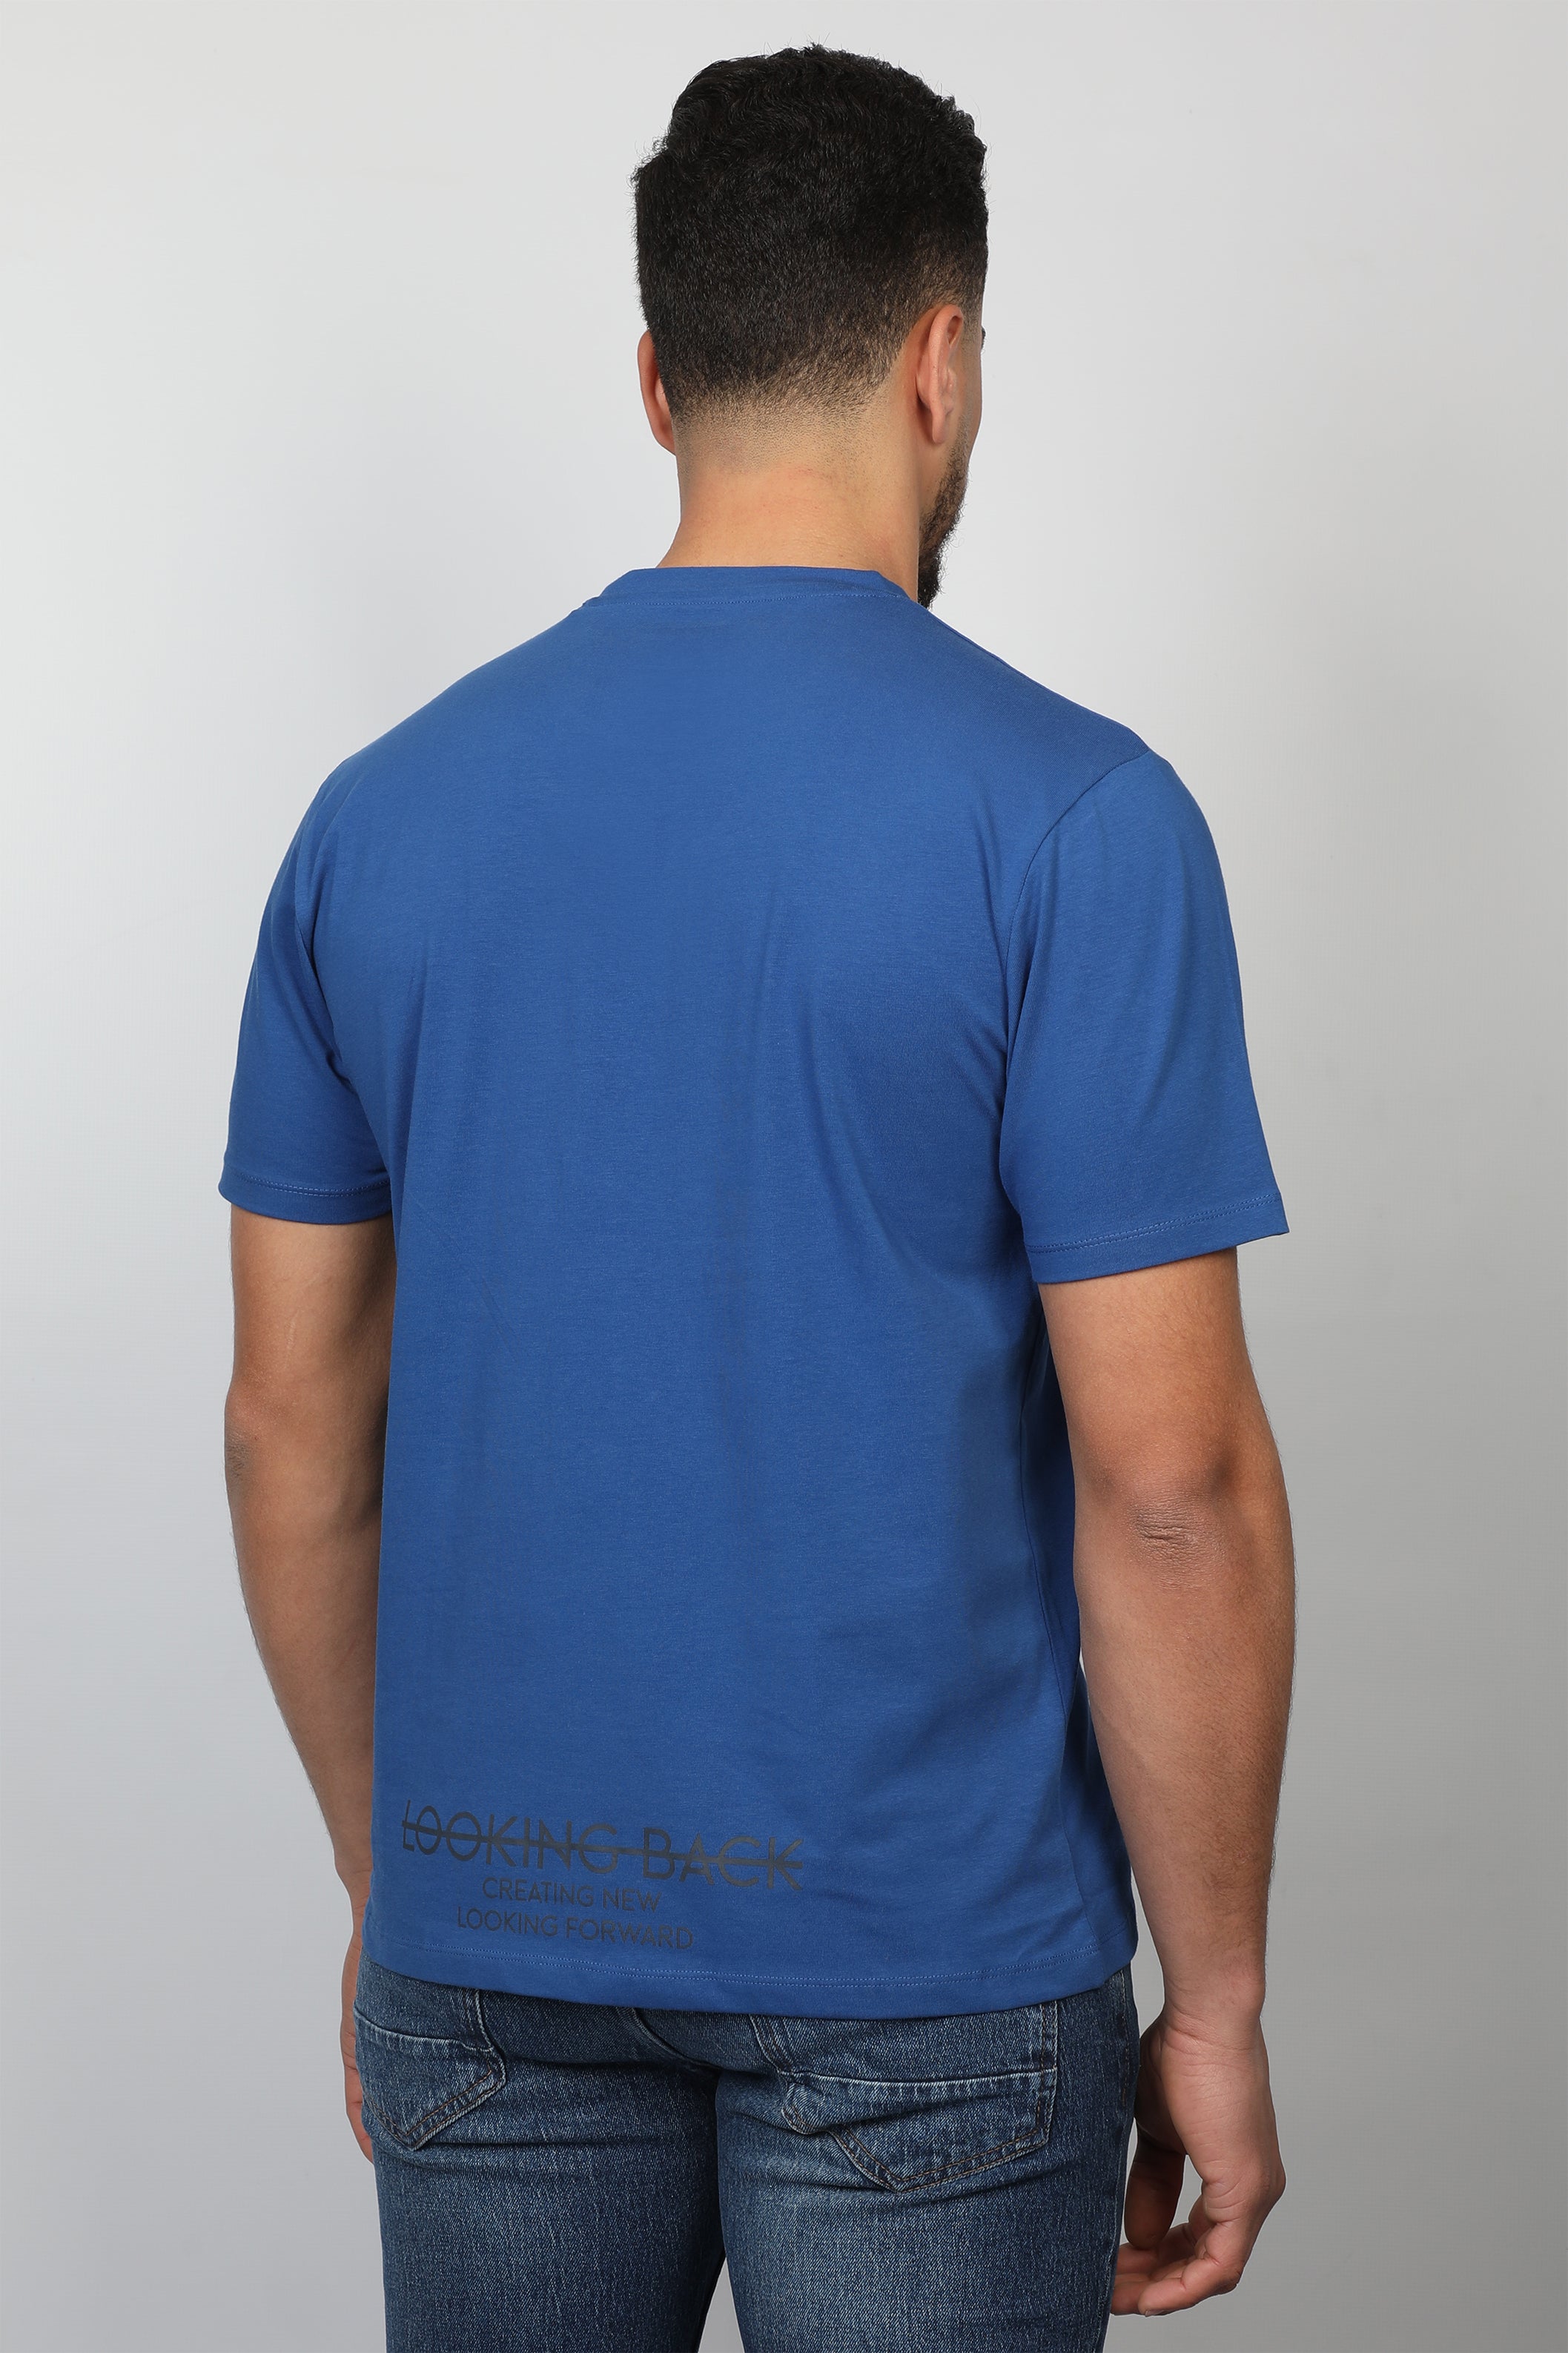 Blue T-shirt Front and Lower Back Design